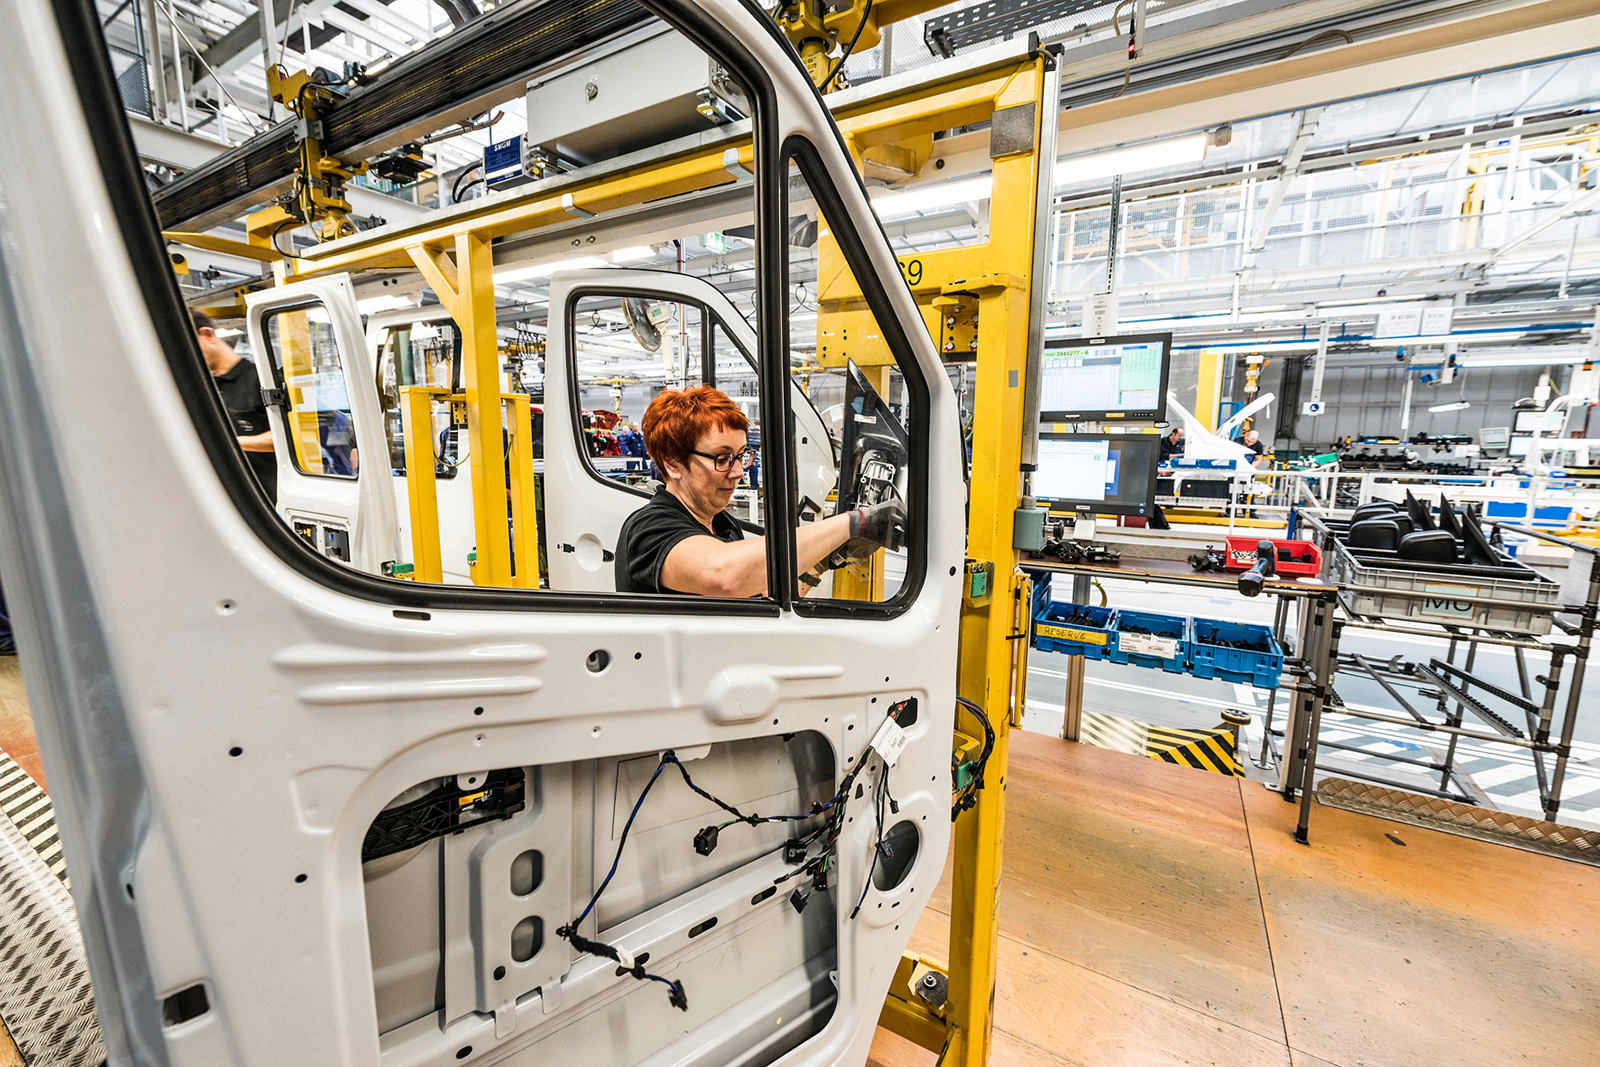 Interconnected technologies boost process reliability in manufacturing. First, side mirrors and seats were tagged with RFID tags in a pilot Phase.